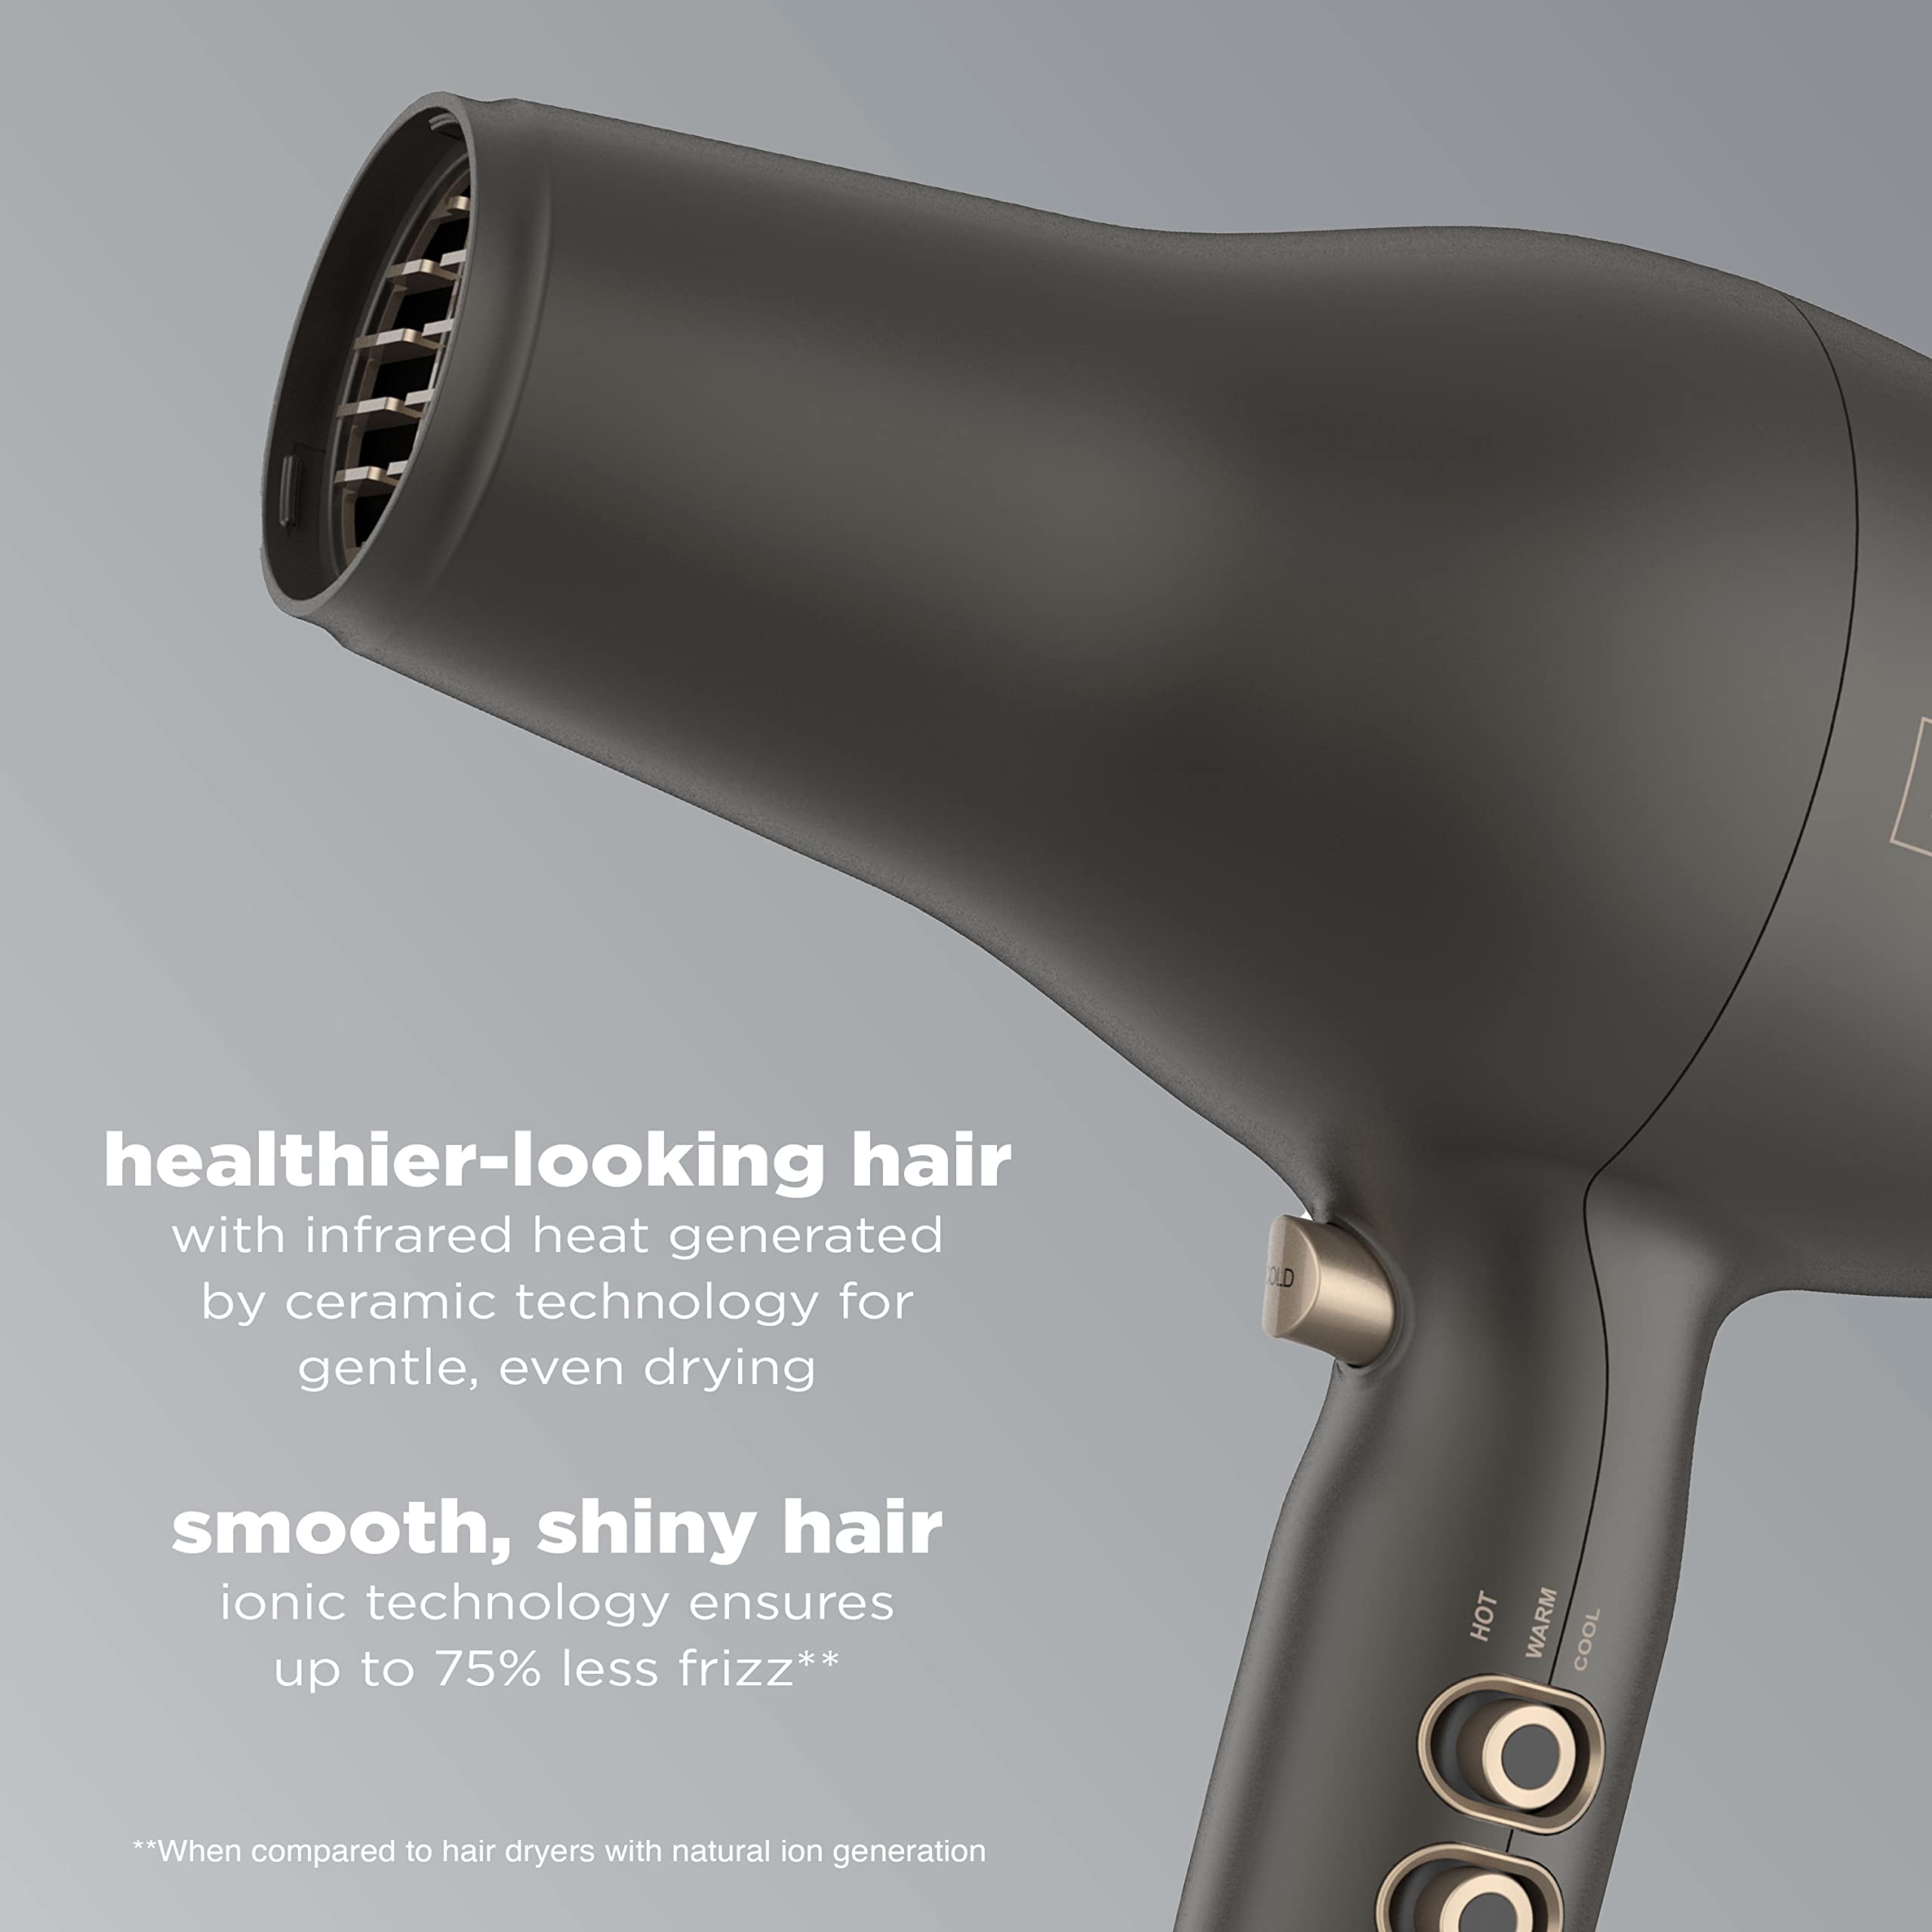 INFINITIPRO by CONAIR 1875 Watt FloMotion Pro Hair Dryer, Personalize Your Drying Experience with Adjustable Airflow, Includes Concentrator and Diffuser